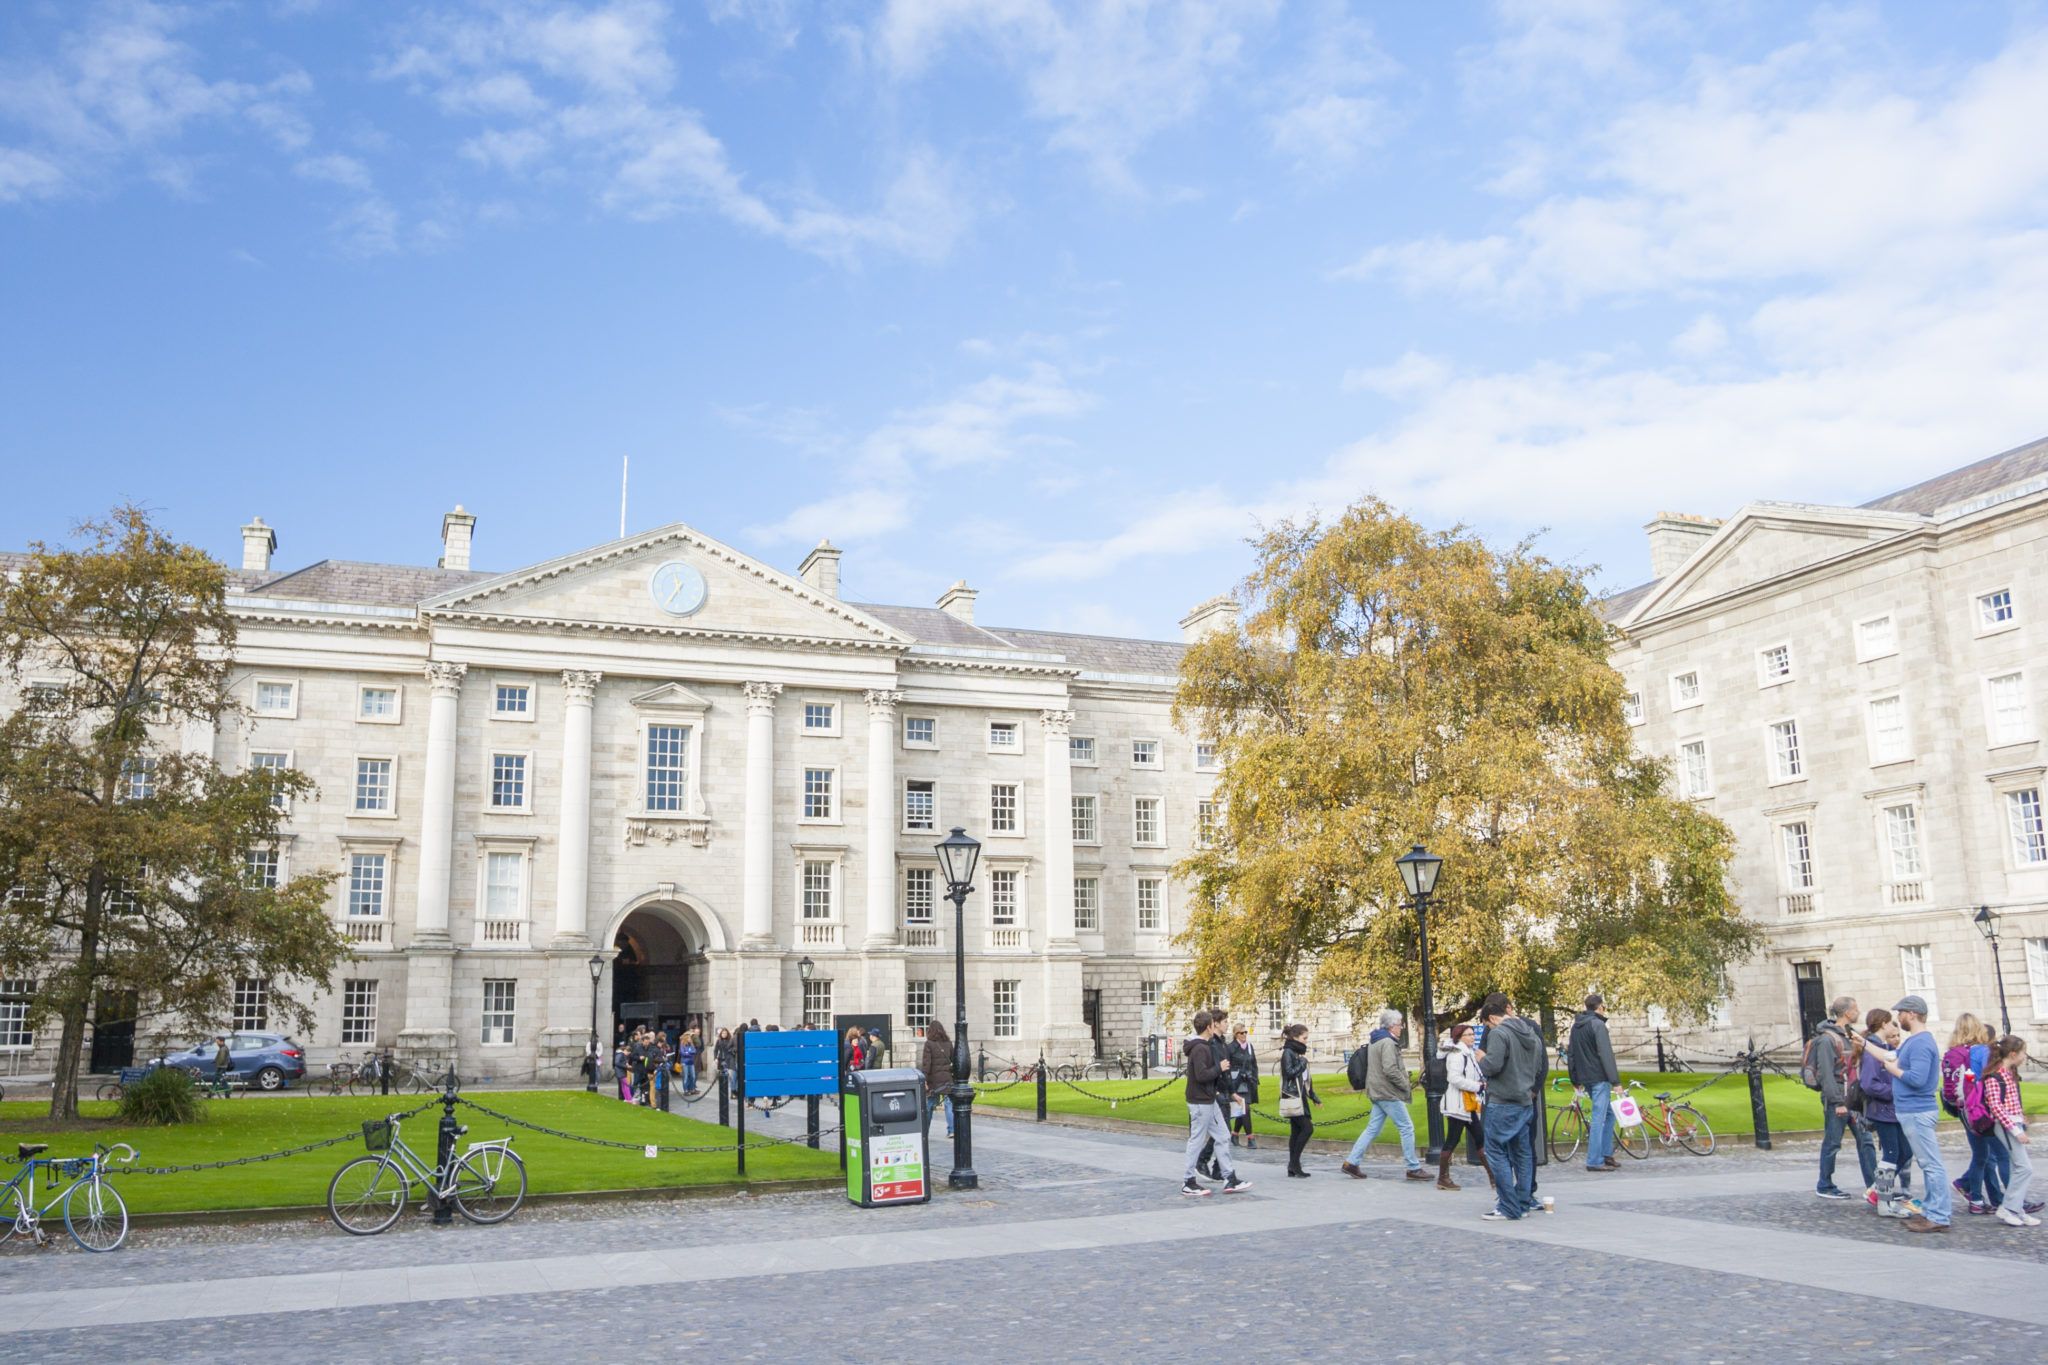 Simon Harris answers question on students “hooking up” as September campus return confirmed